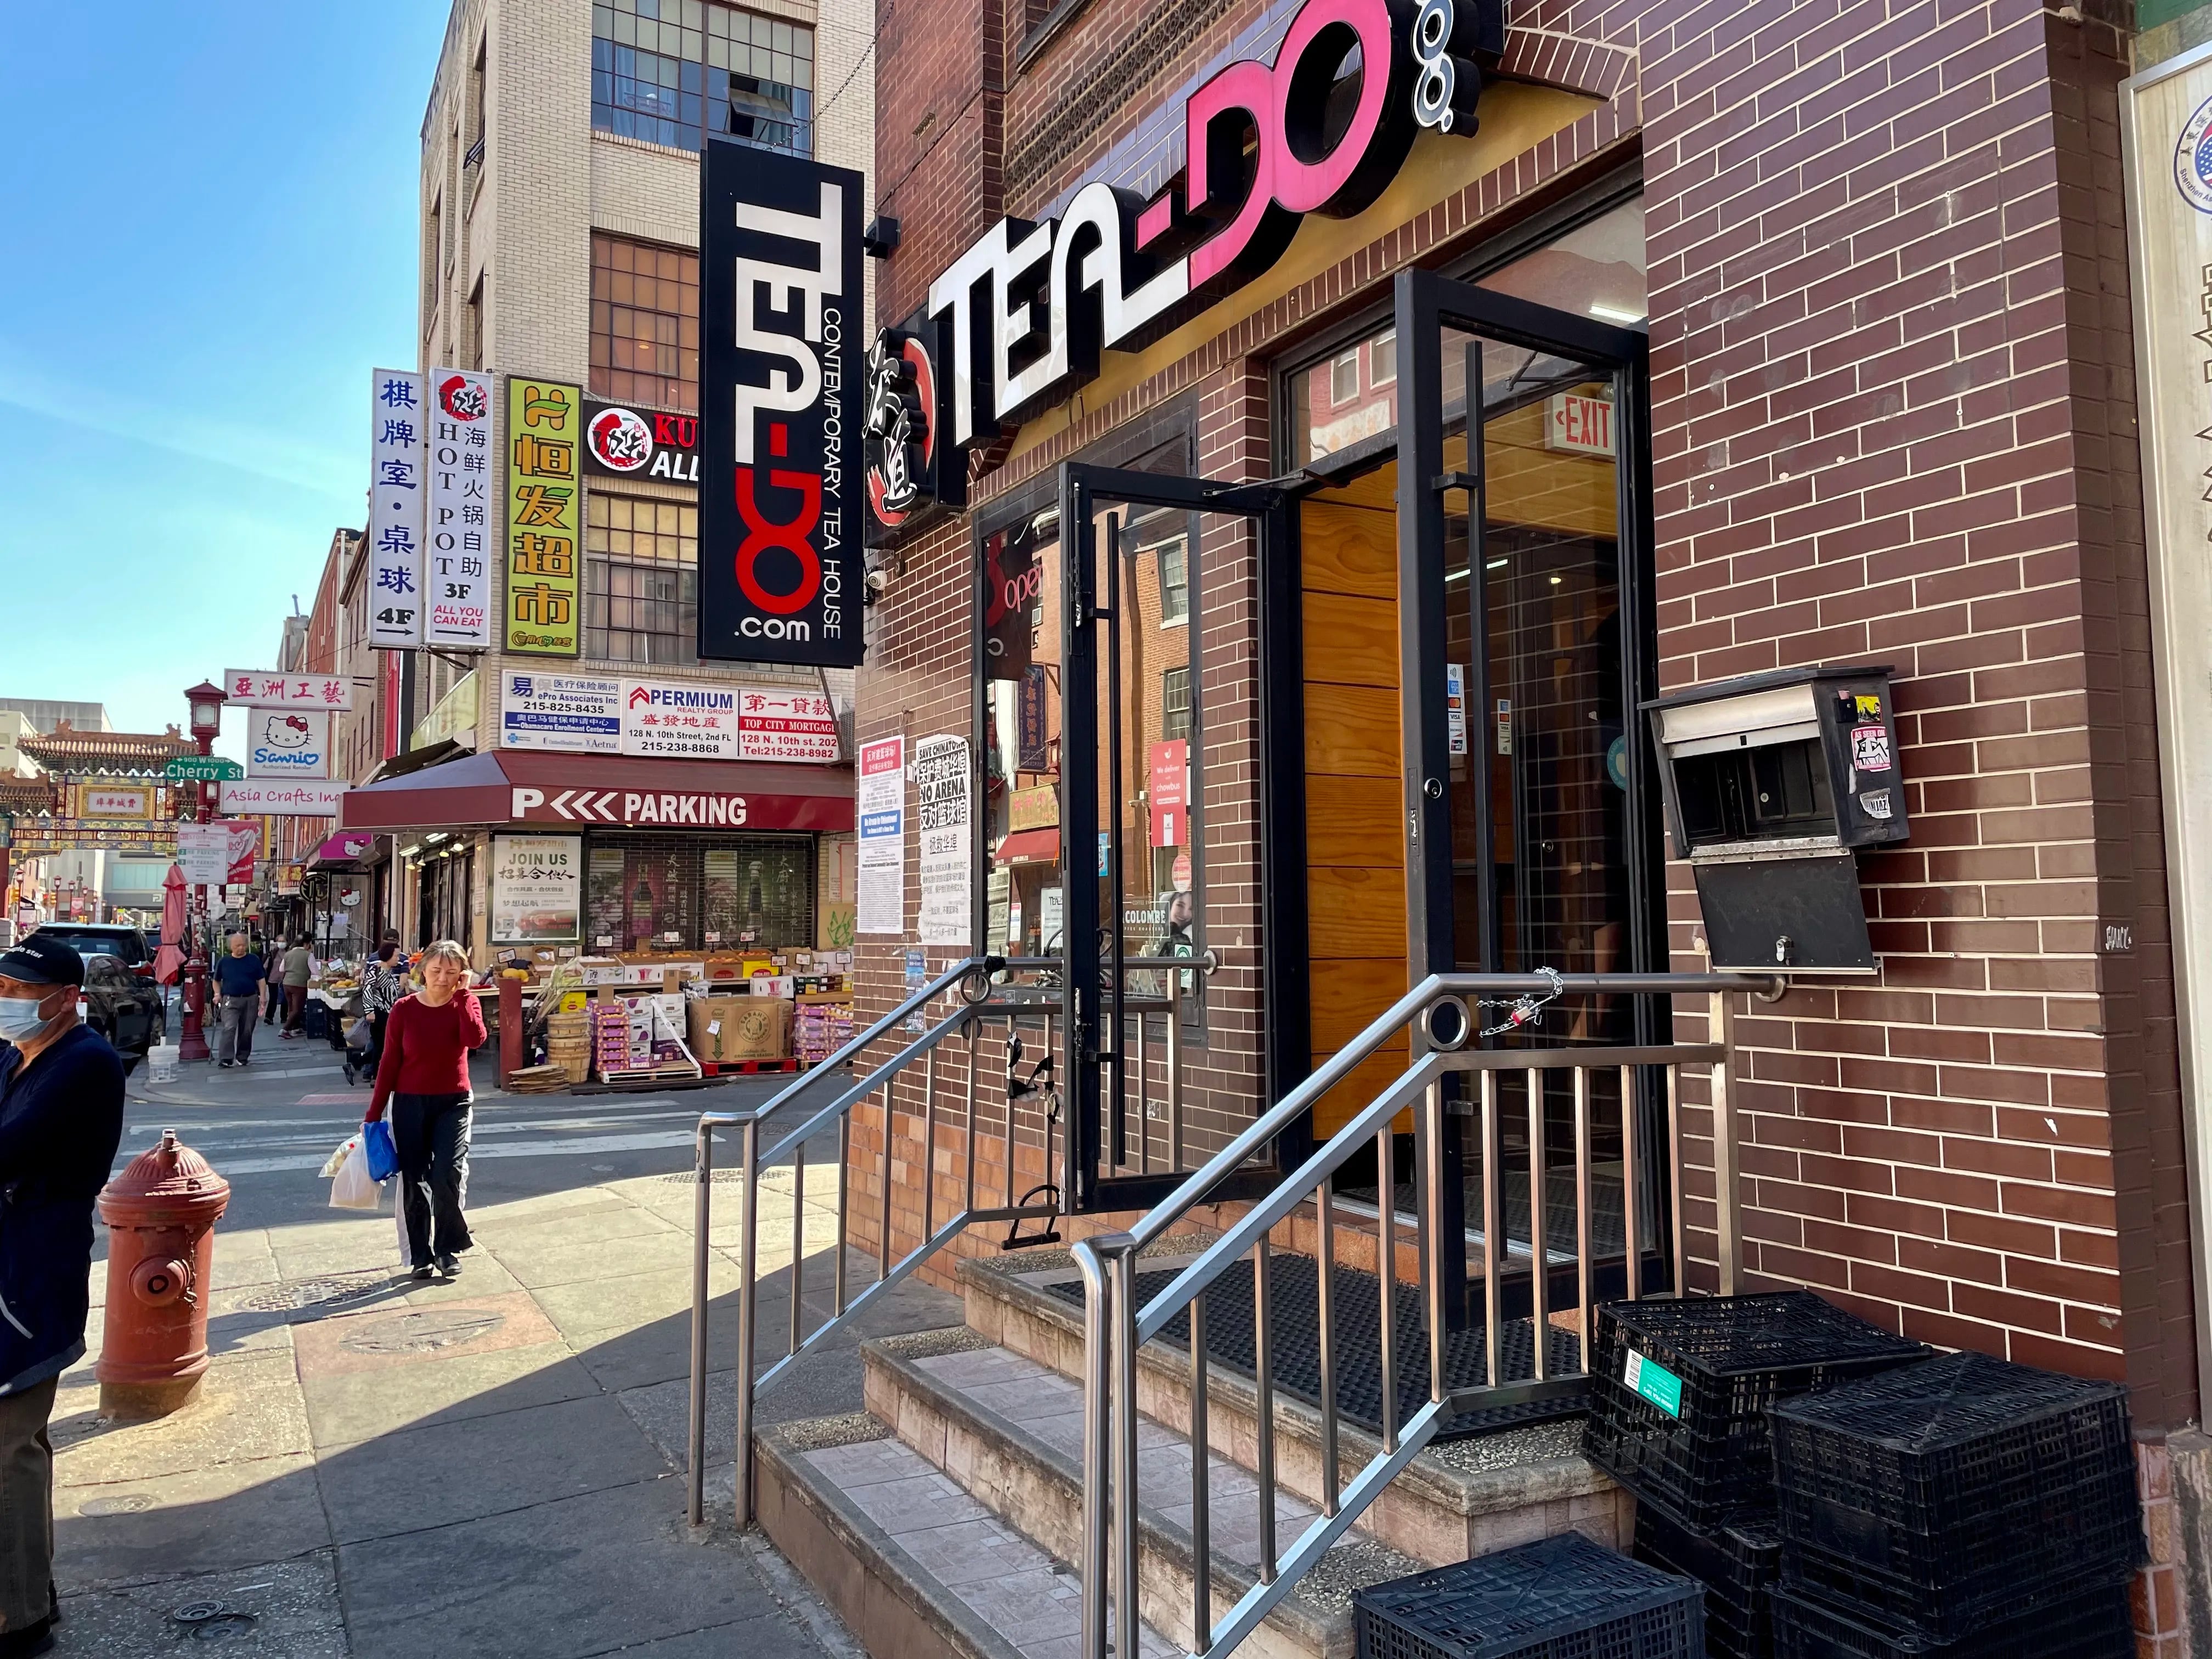 Tea-Do sits in Chinatown offering a variety of bubble tea drinks.